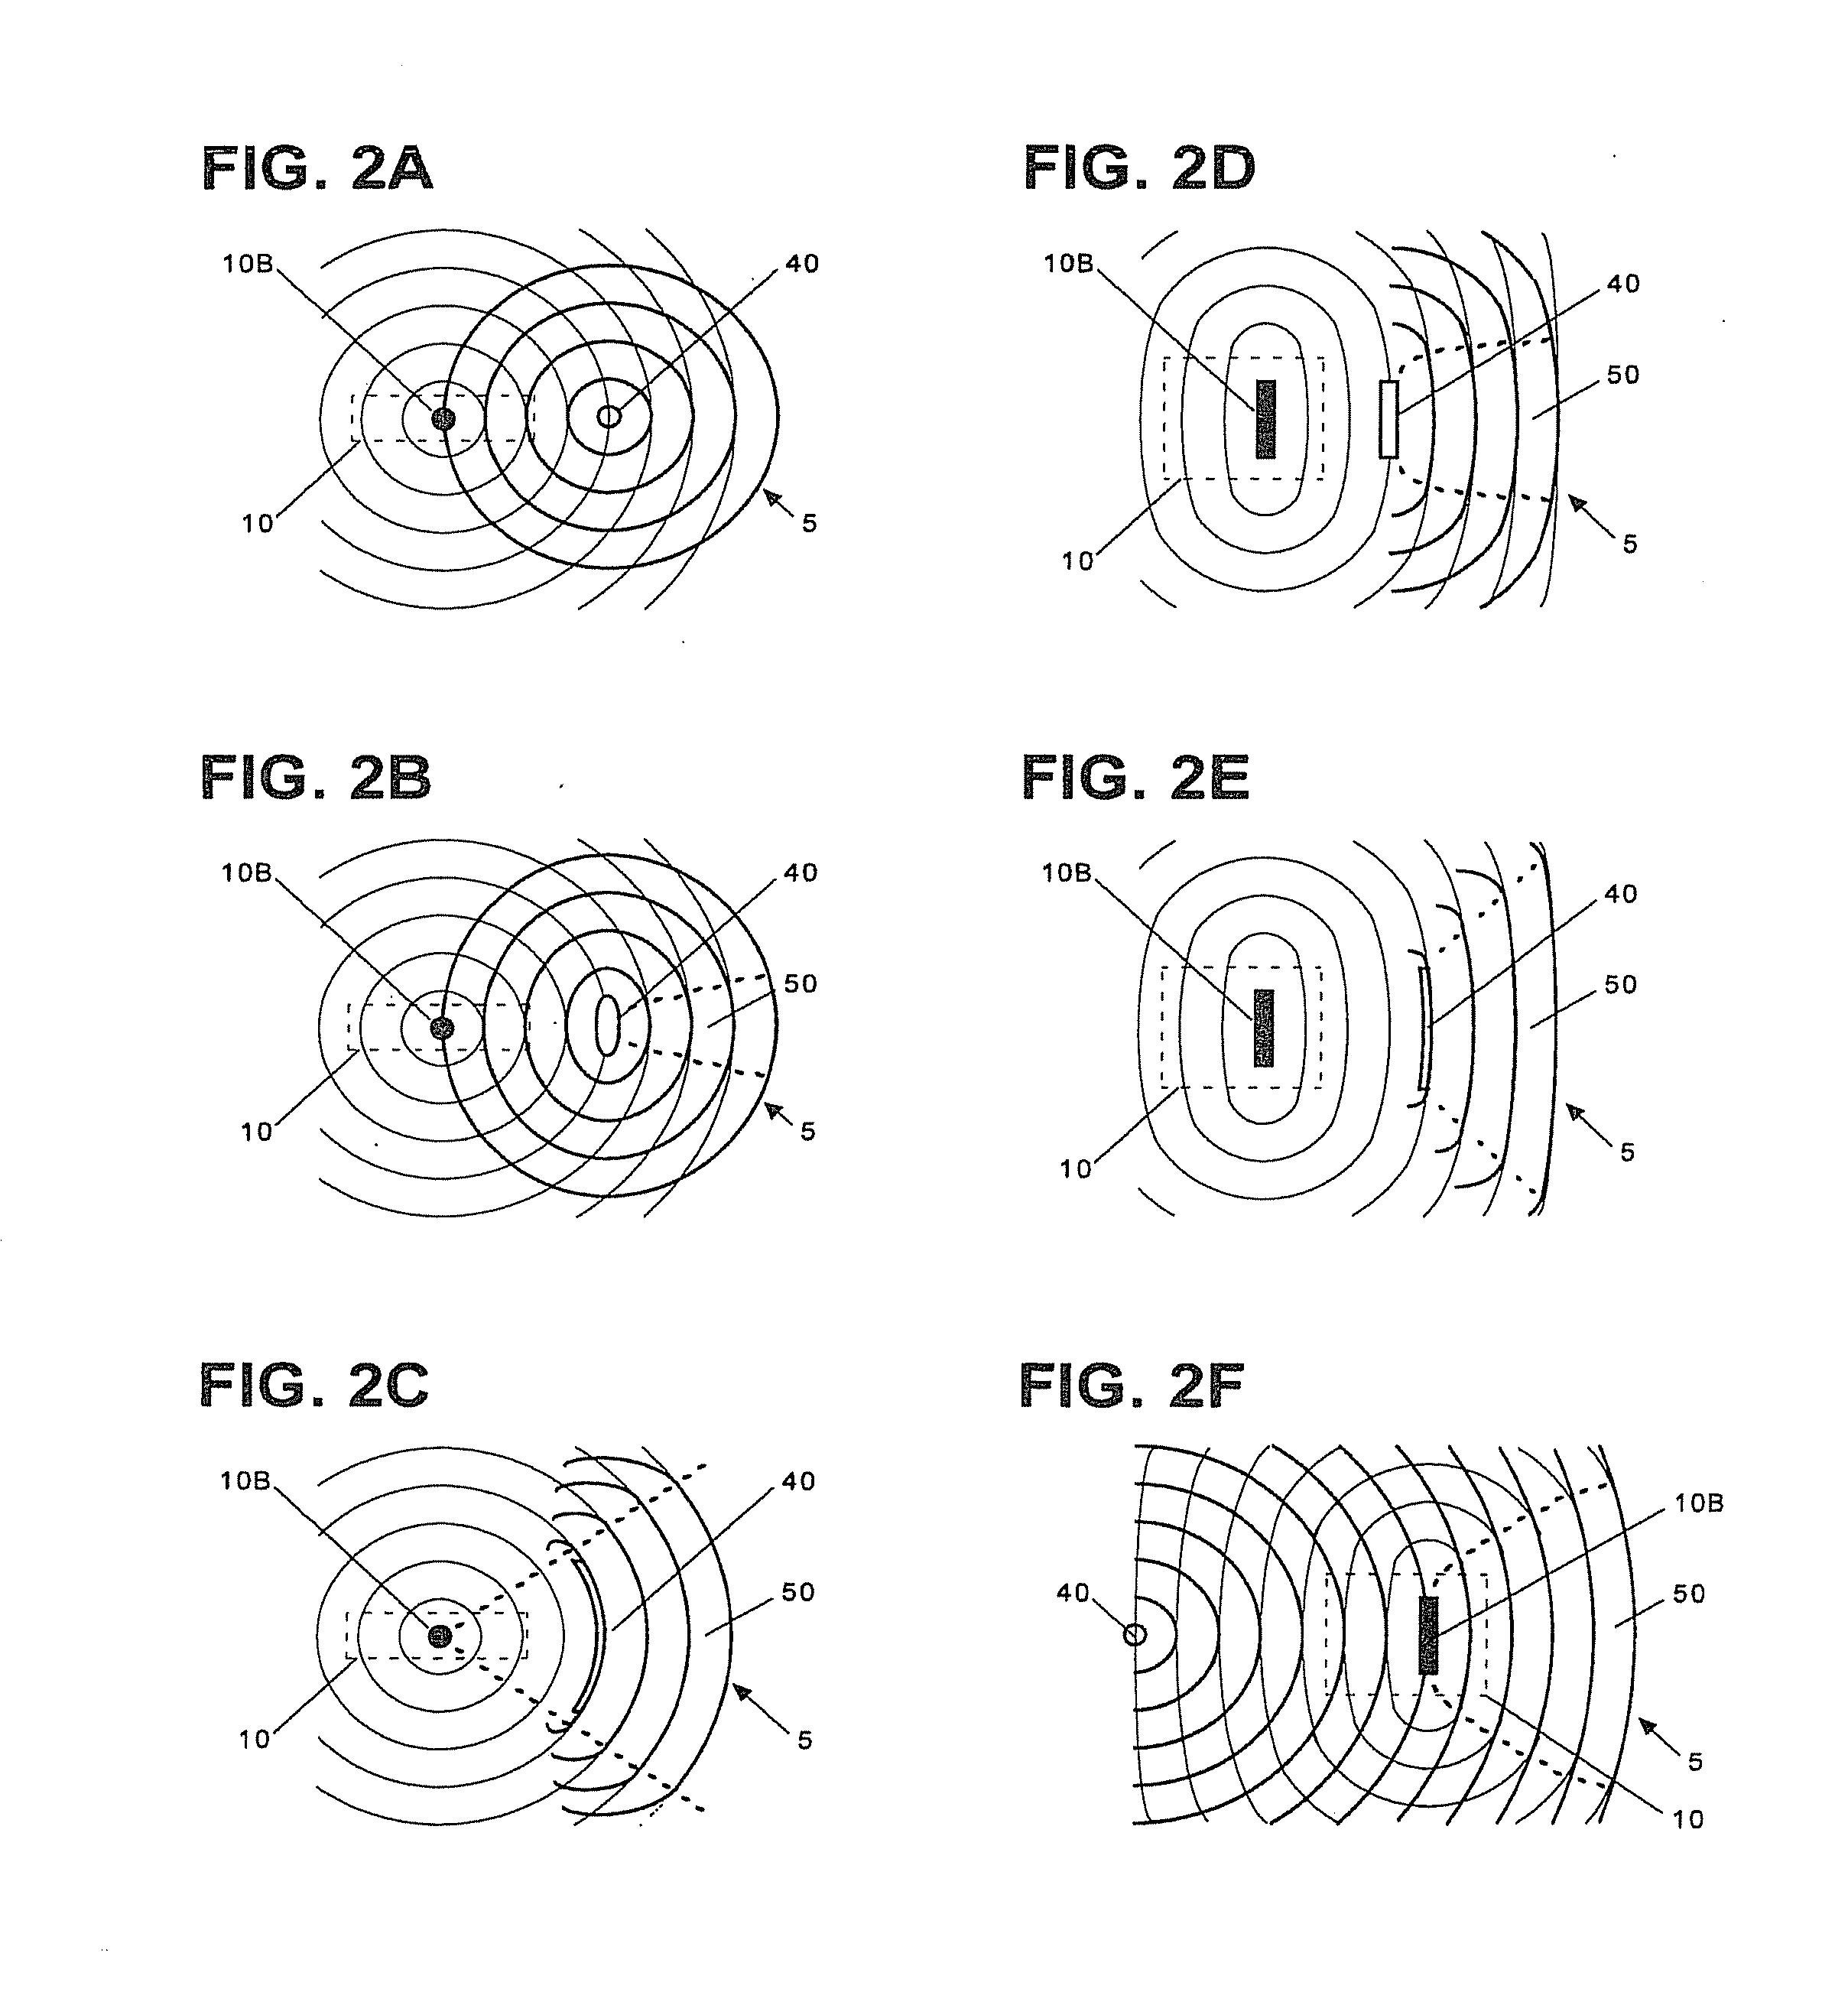 Electromagnetically-countered transformer systems and methods